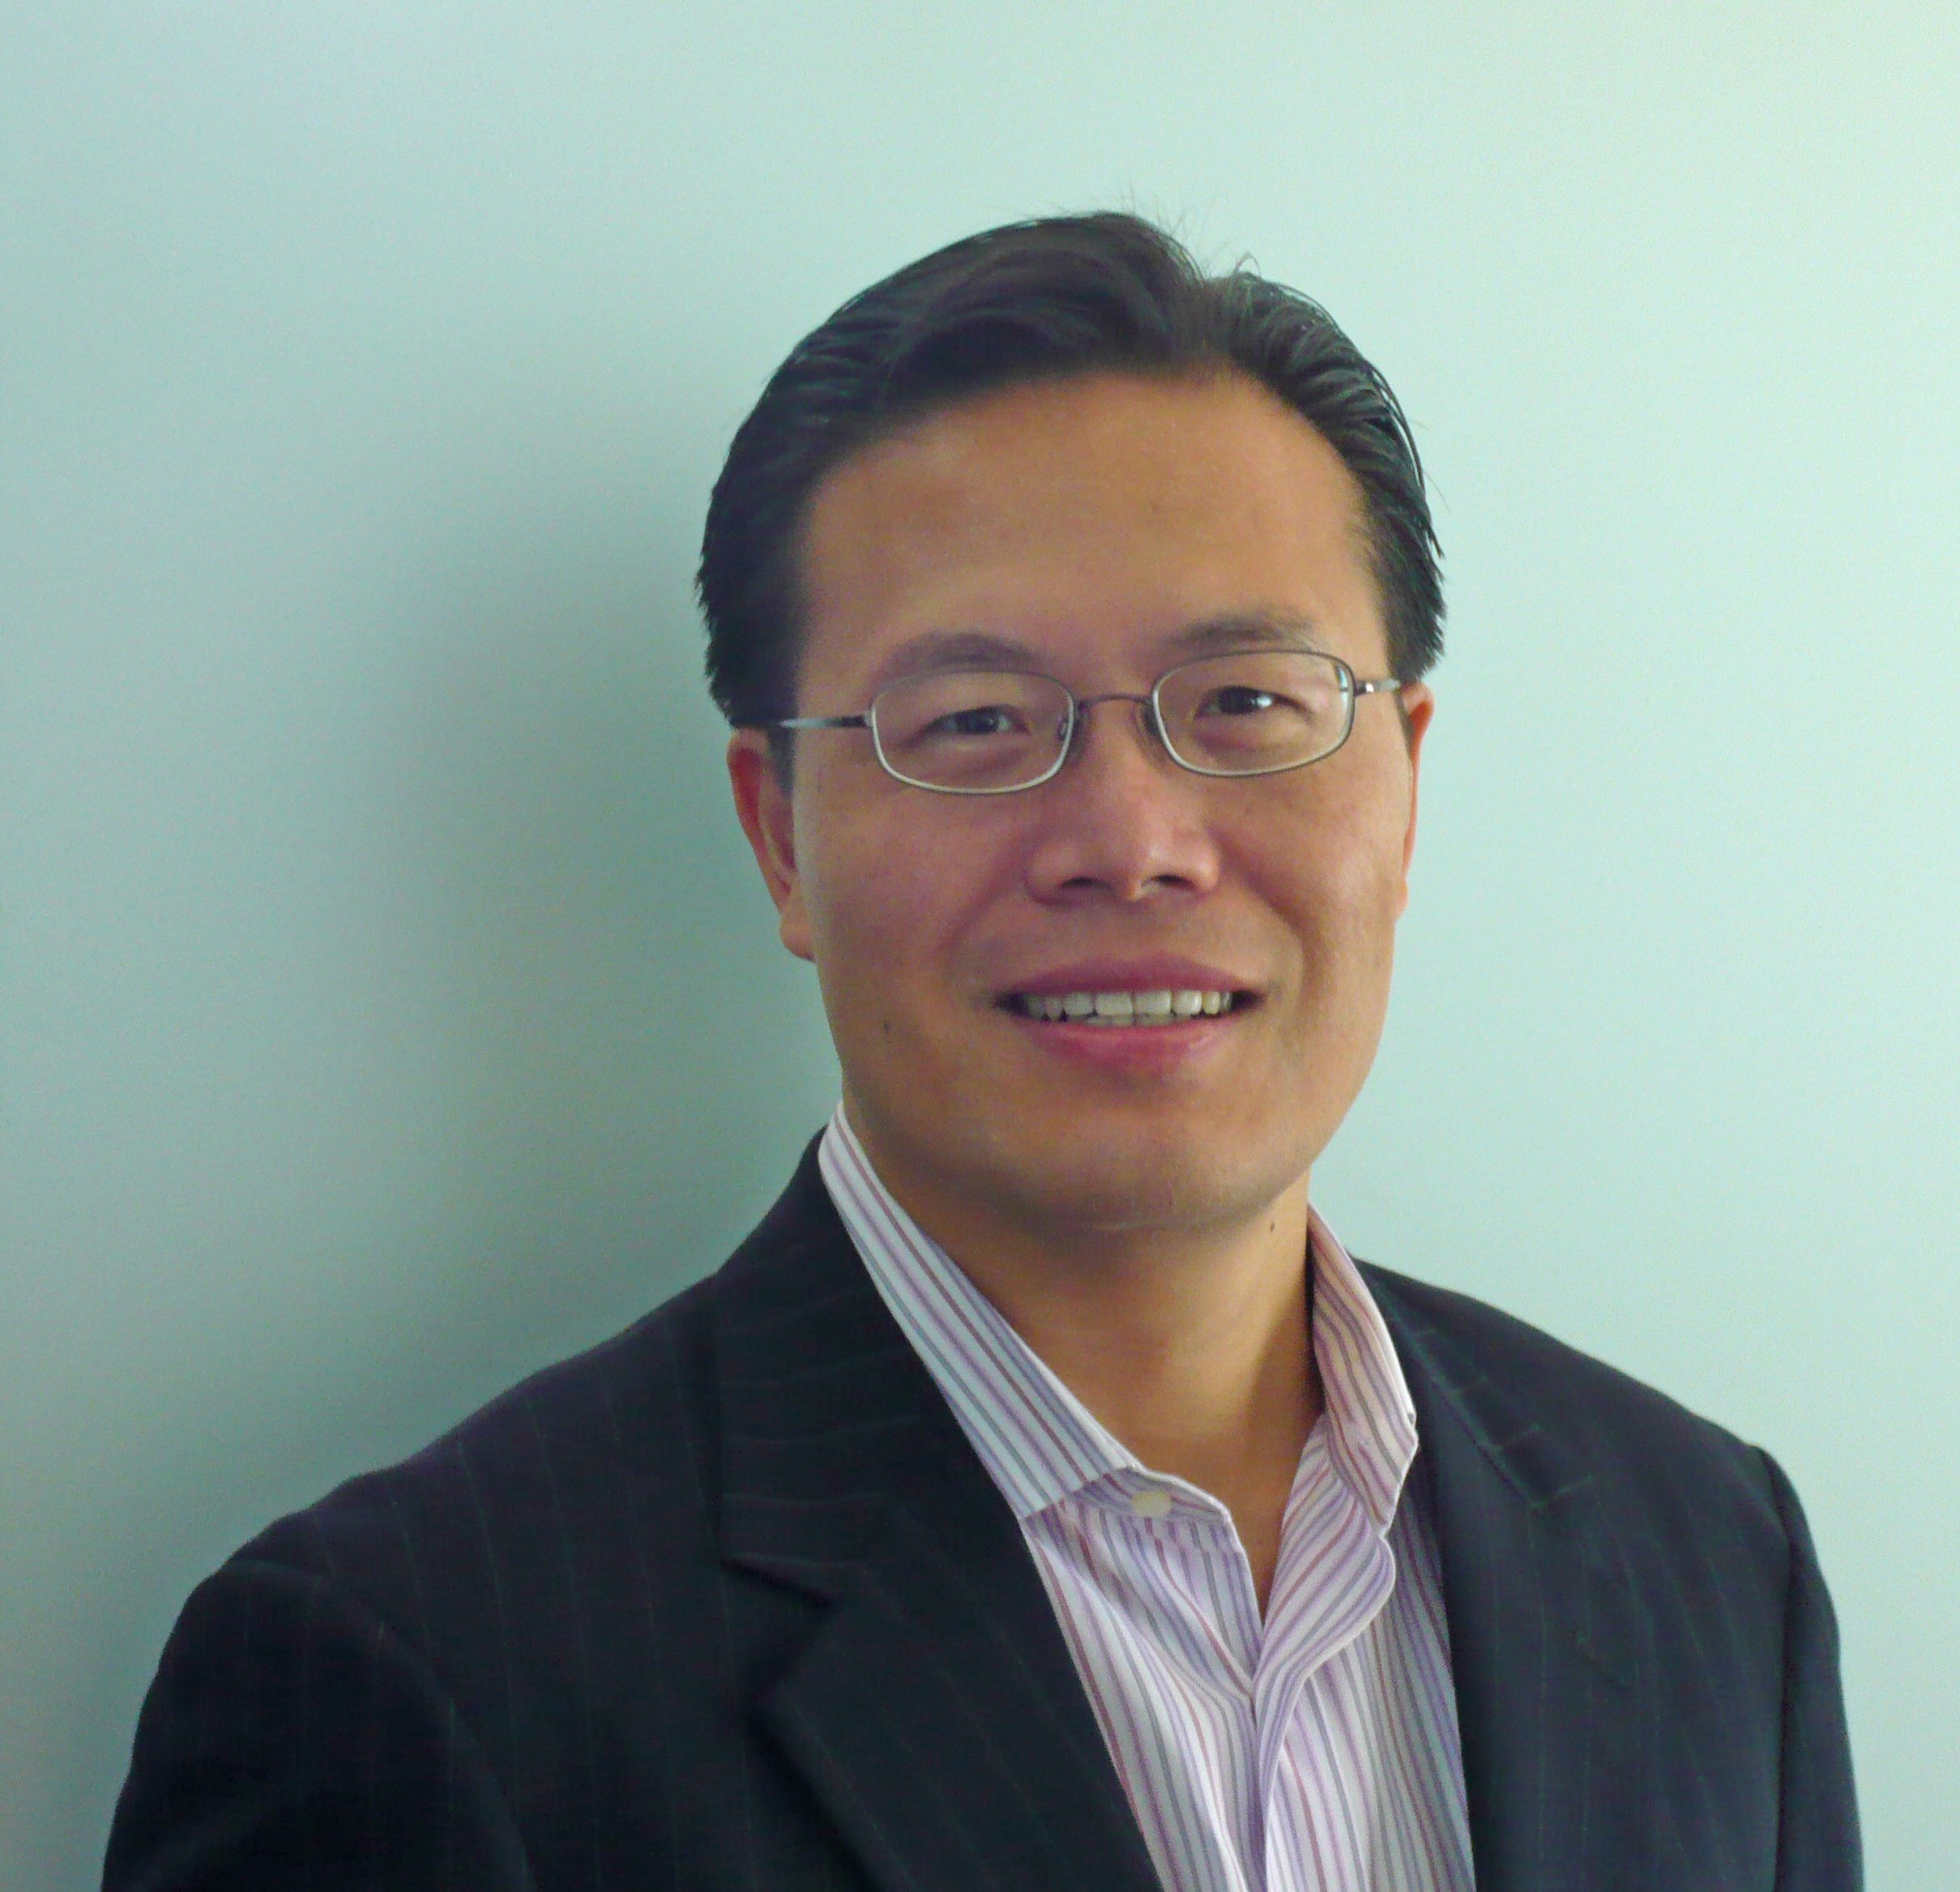 Interview With Wen Shiau From Cypress Capital Group, United States